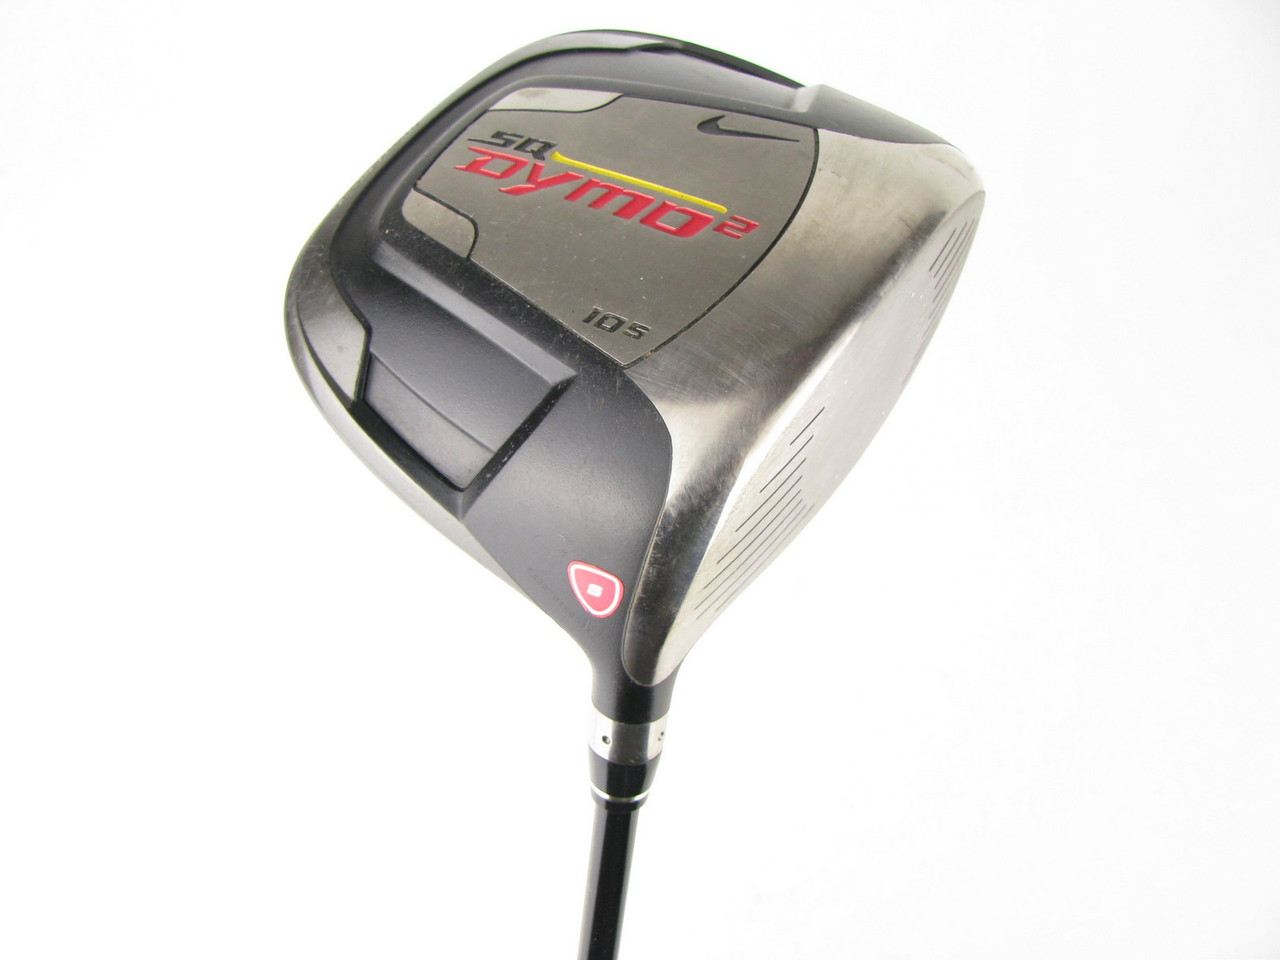 Nike SQ Dymo 2 Driver 10.5 degree w/ Graphite 55g Stiff (Out of Stock) -  Clubs n Covers Golf